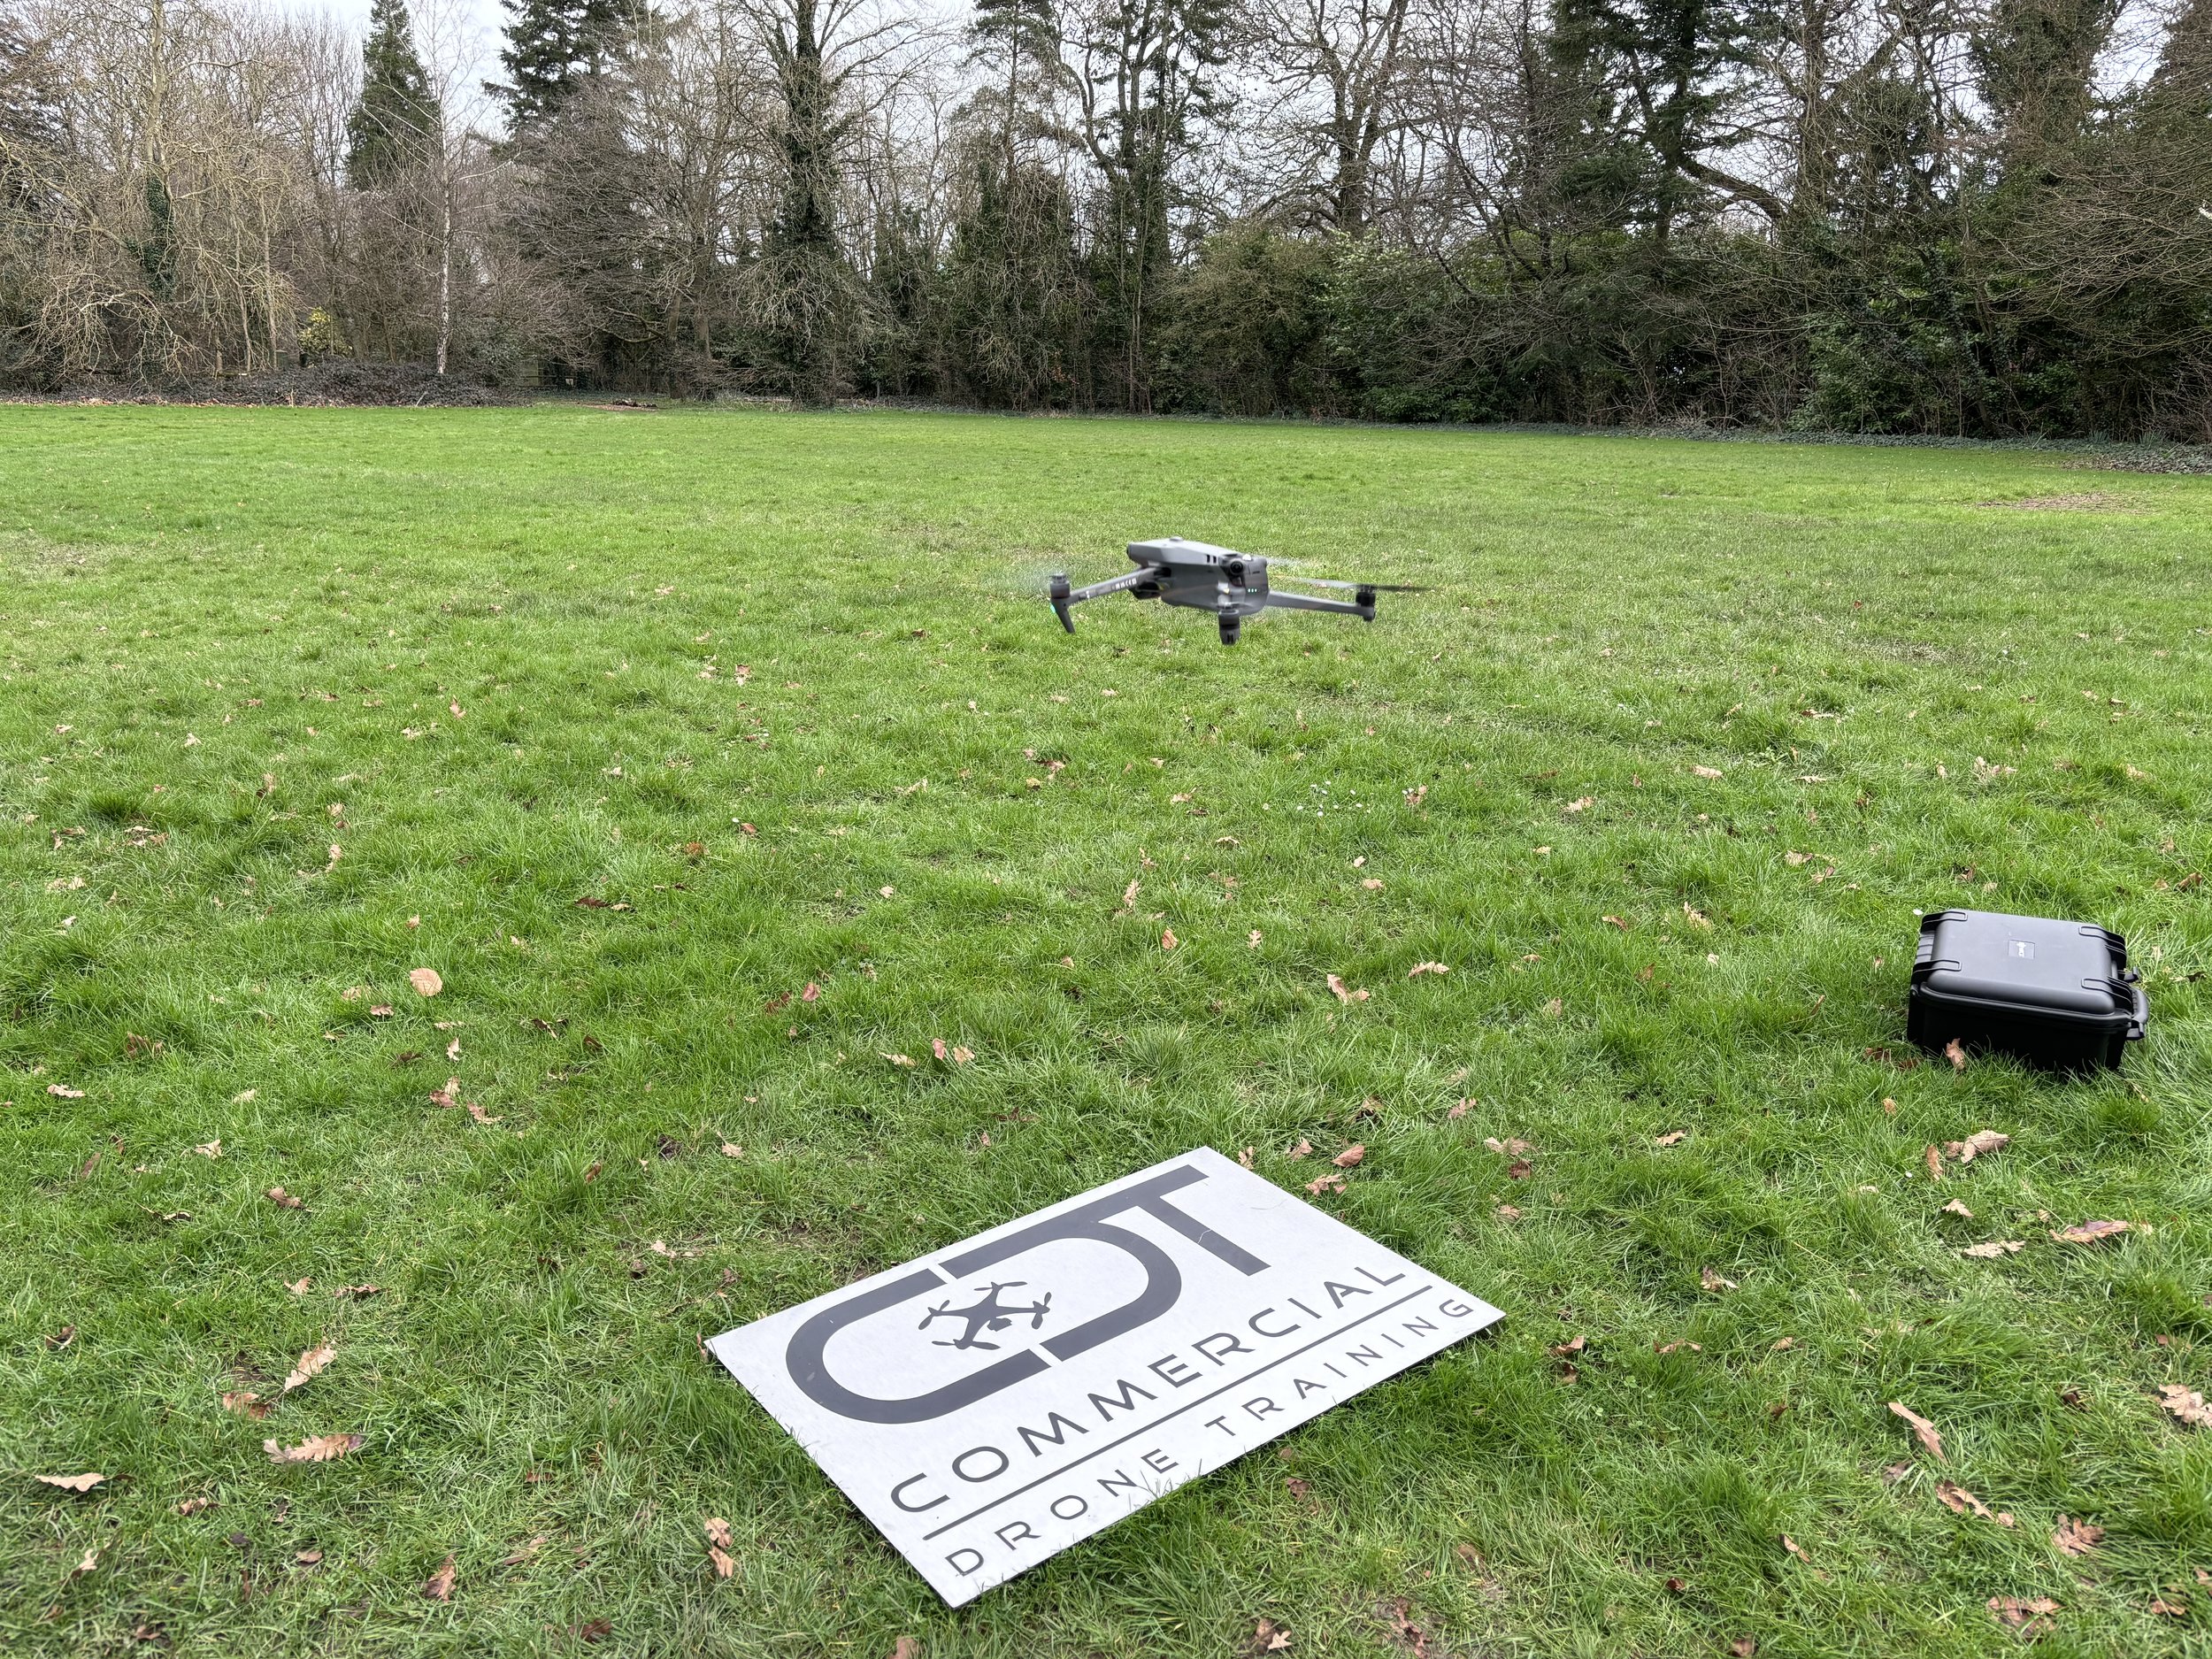 Commercial Drone Training.jpeg